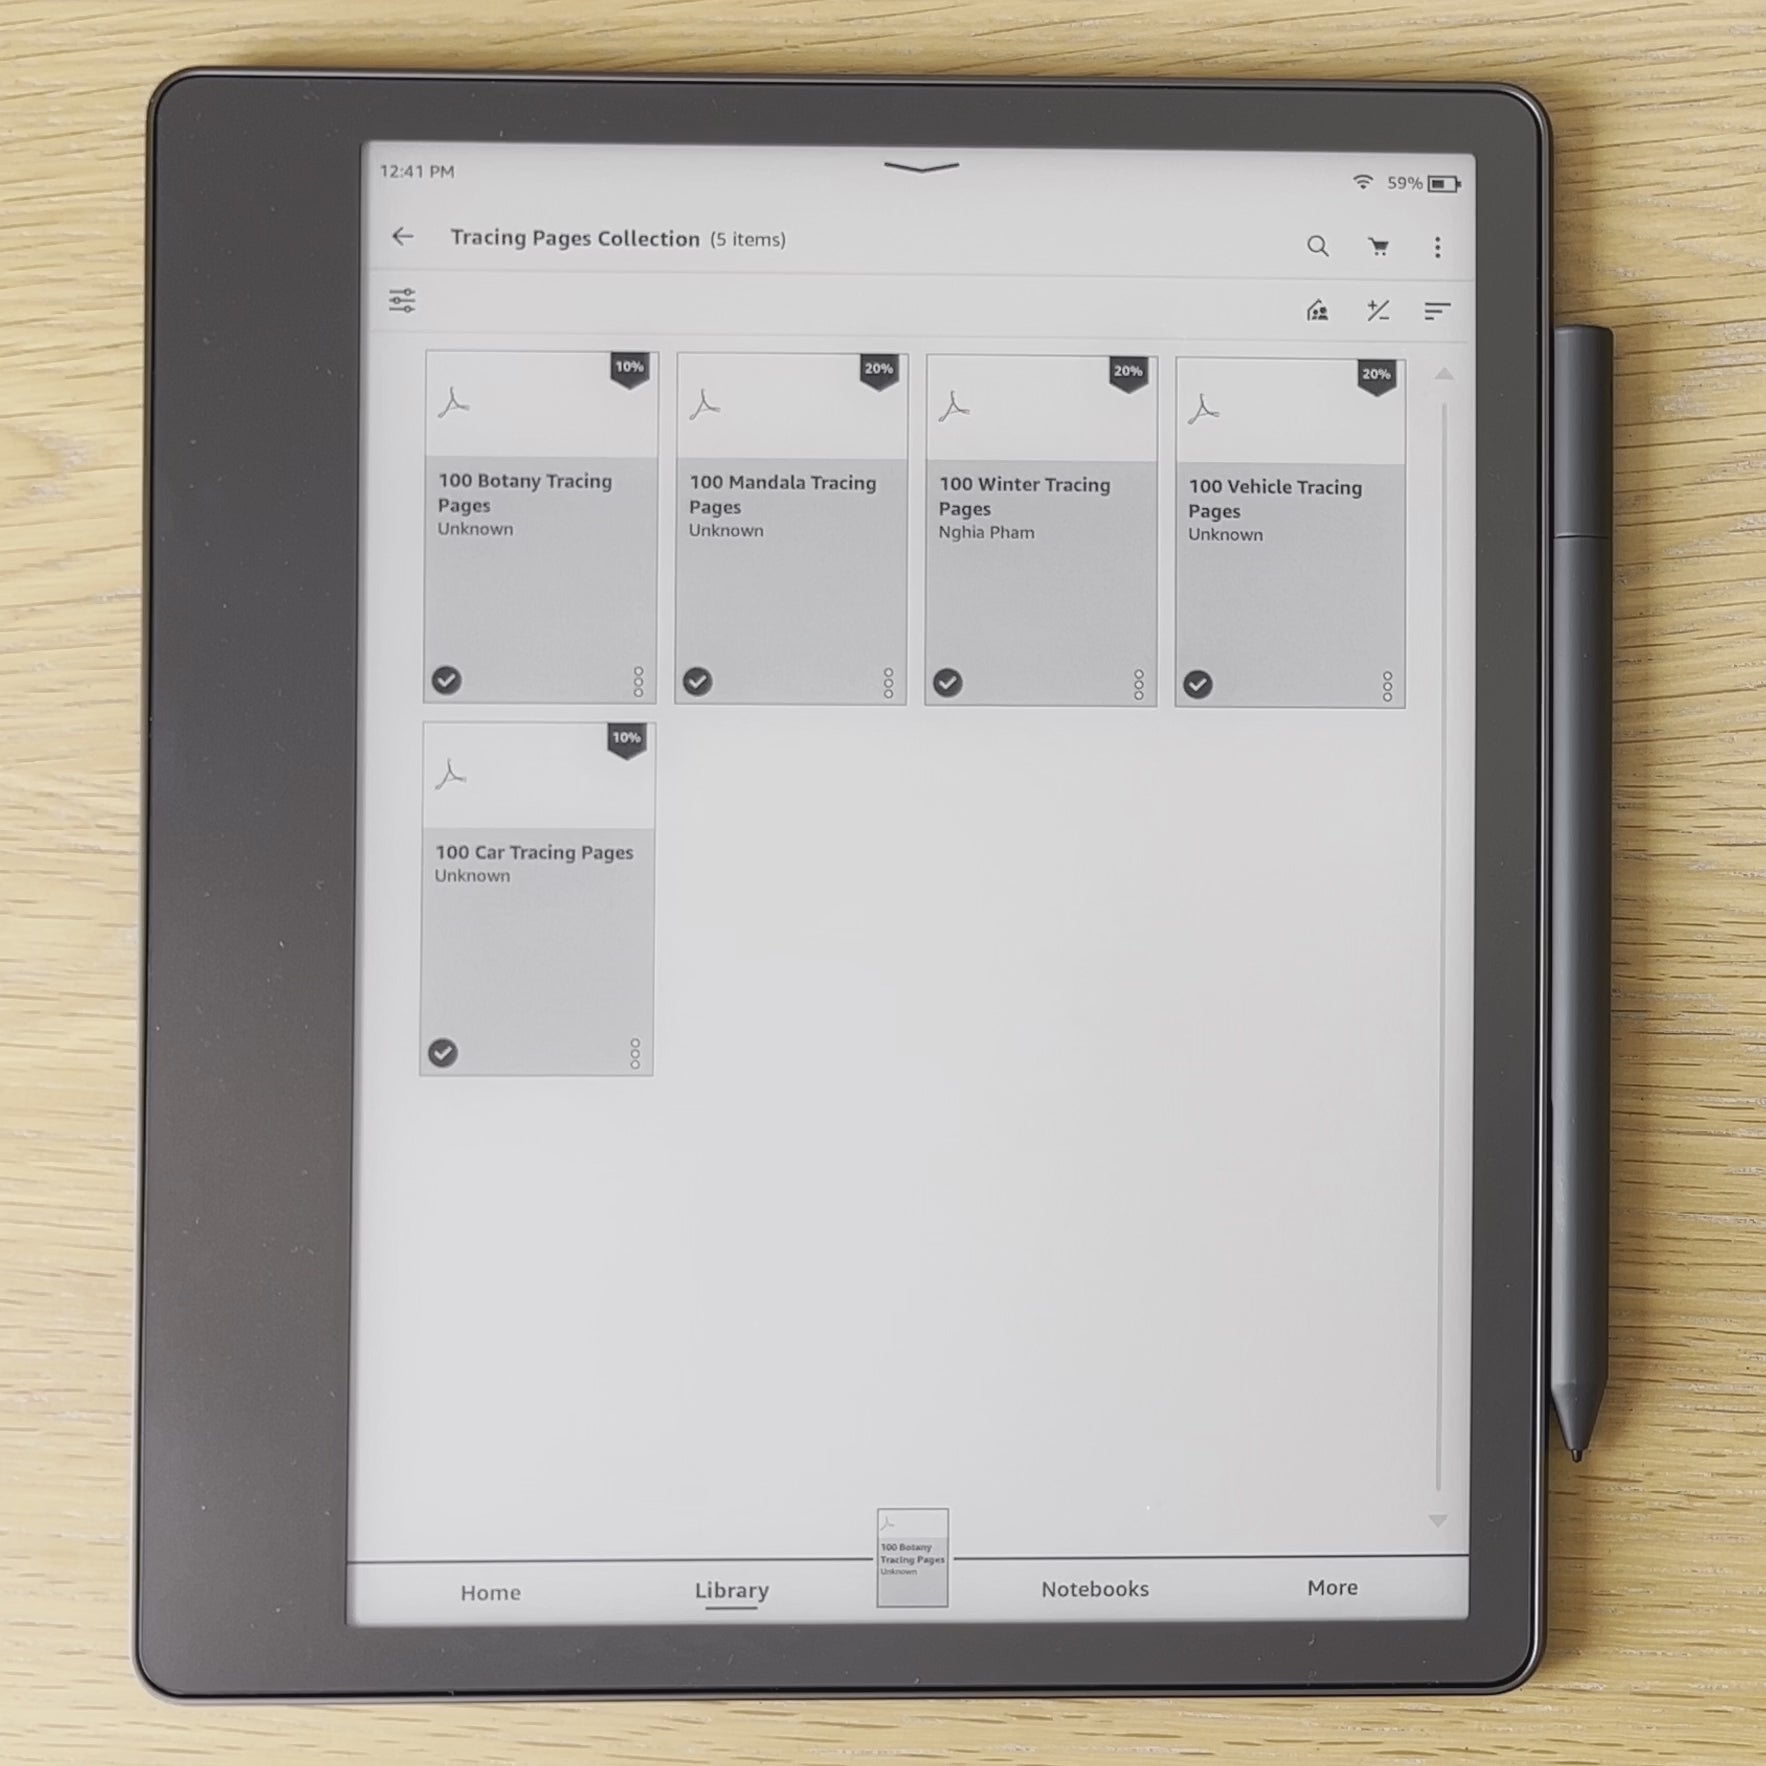 Kindle Scribe Vehicle Tracing Pages